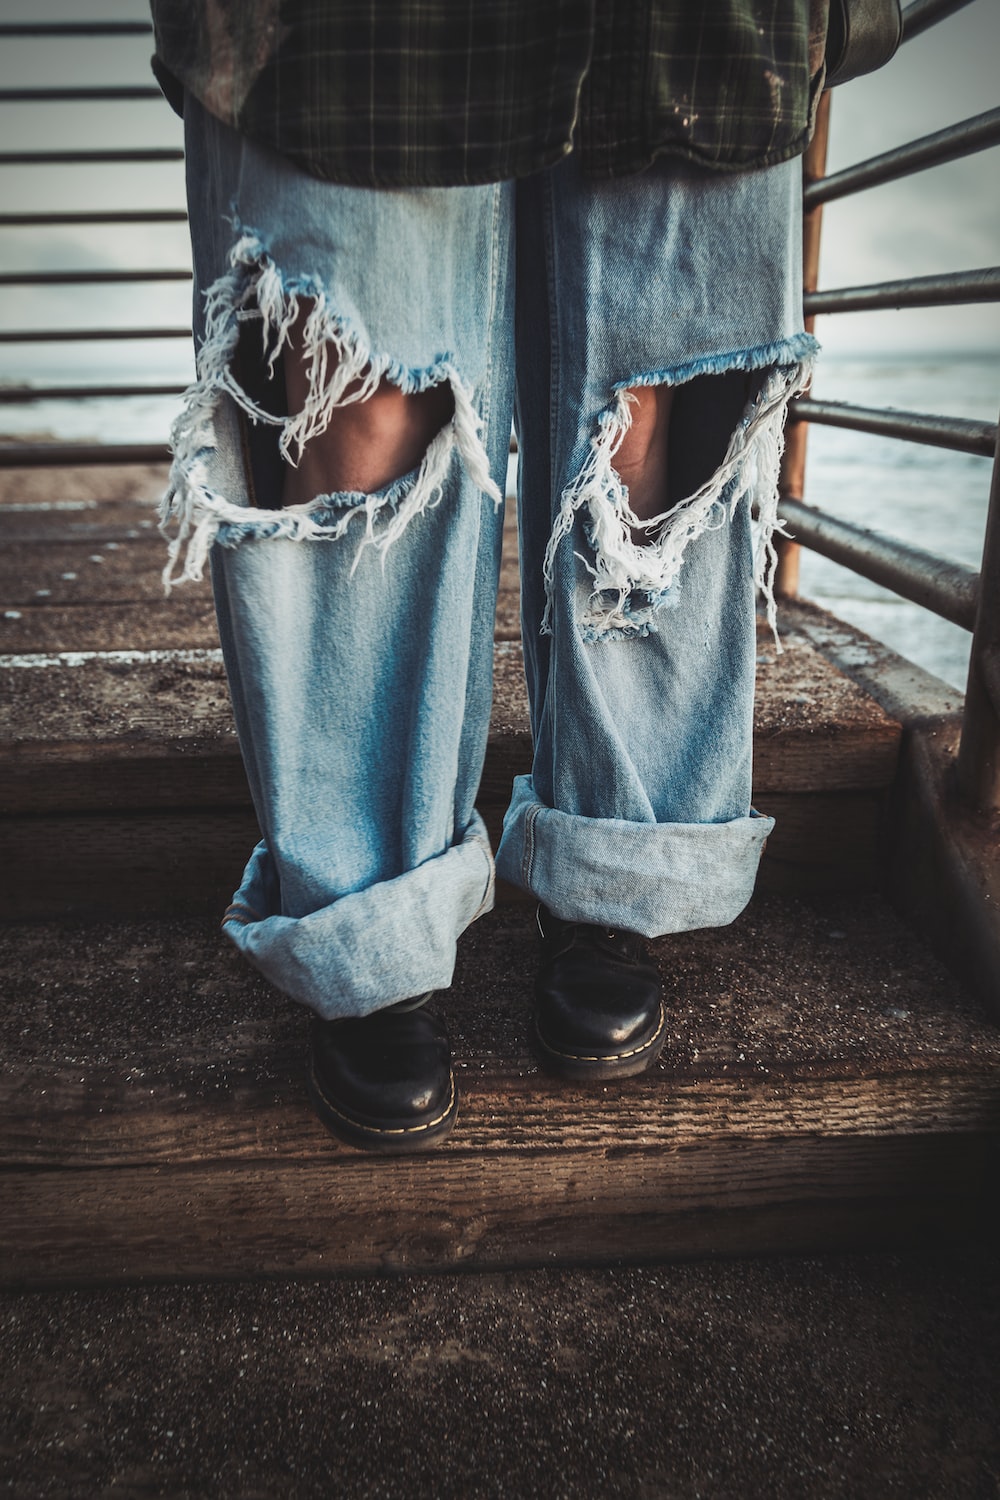 Baggy Jeans Picture. Download Free Image